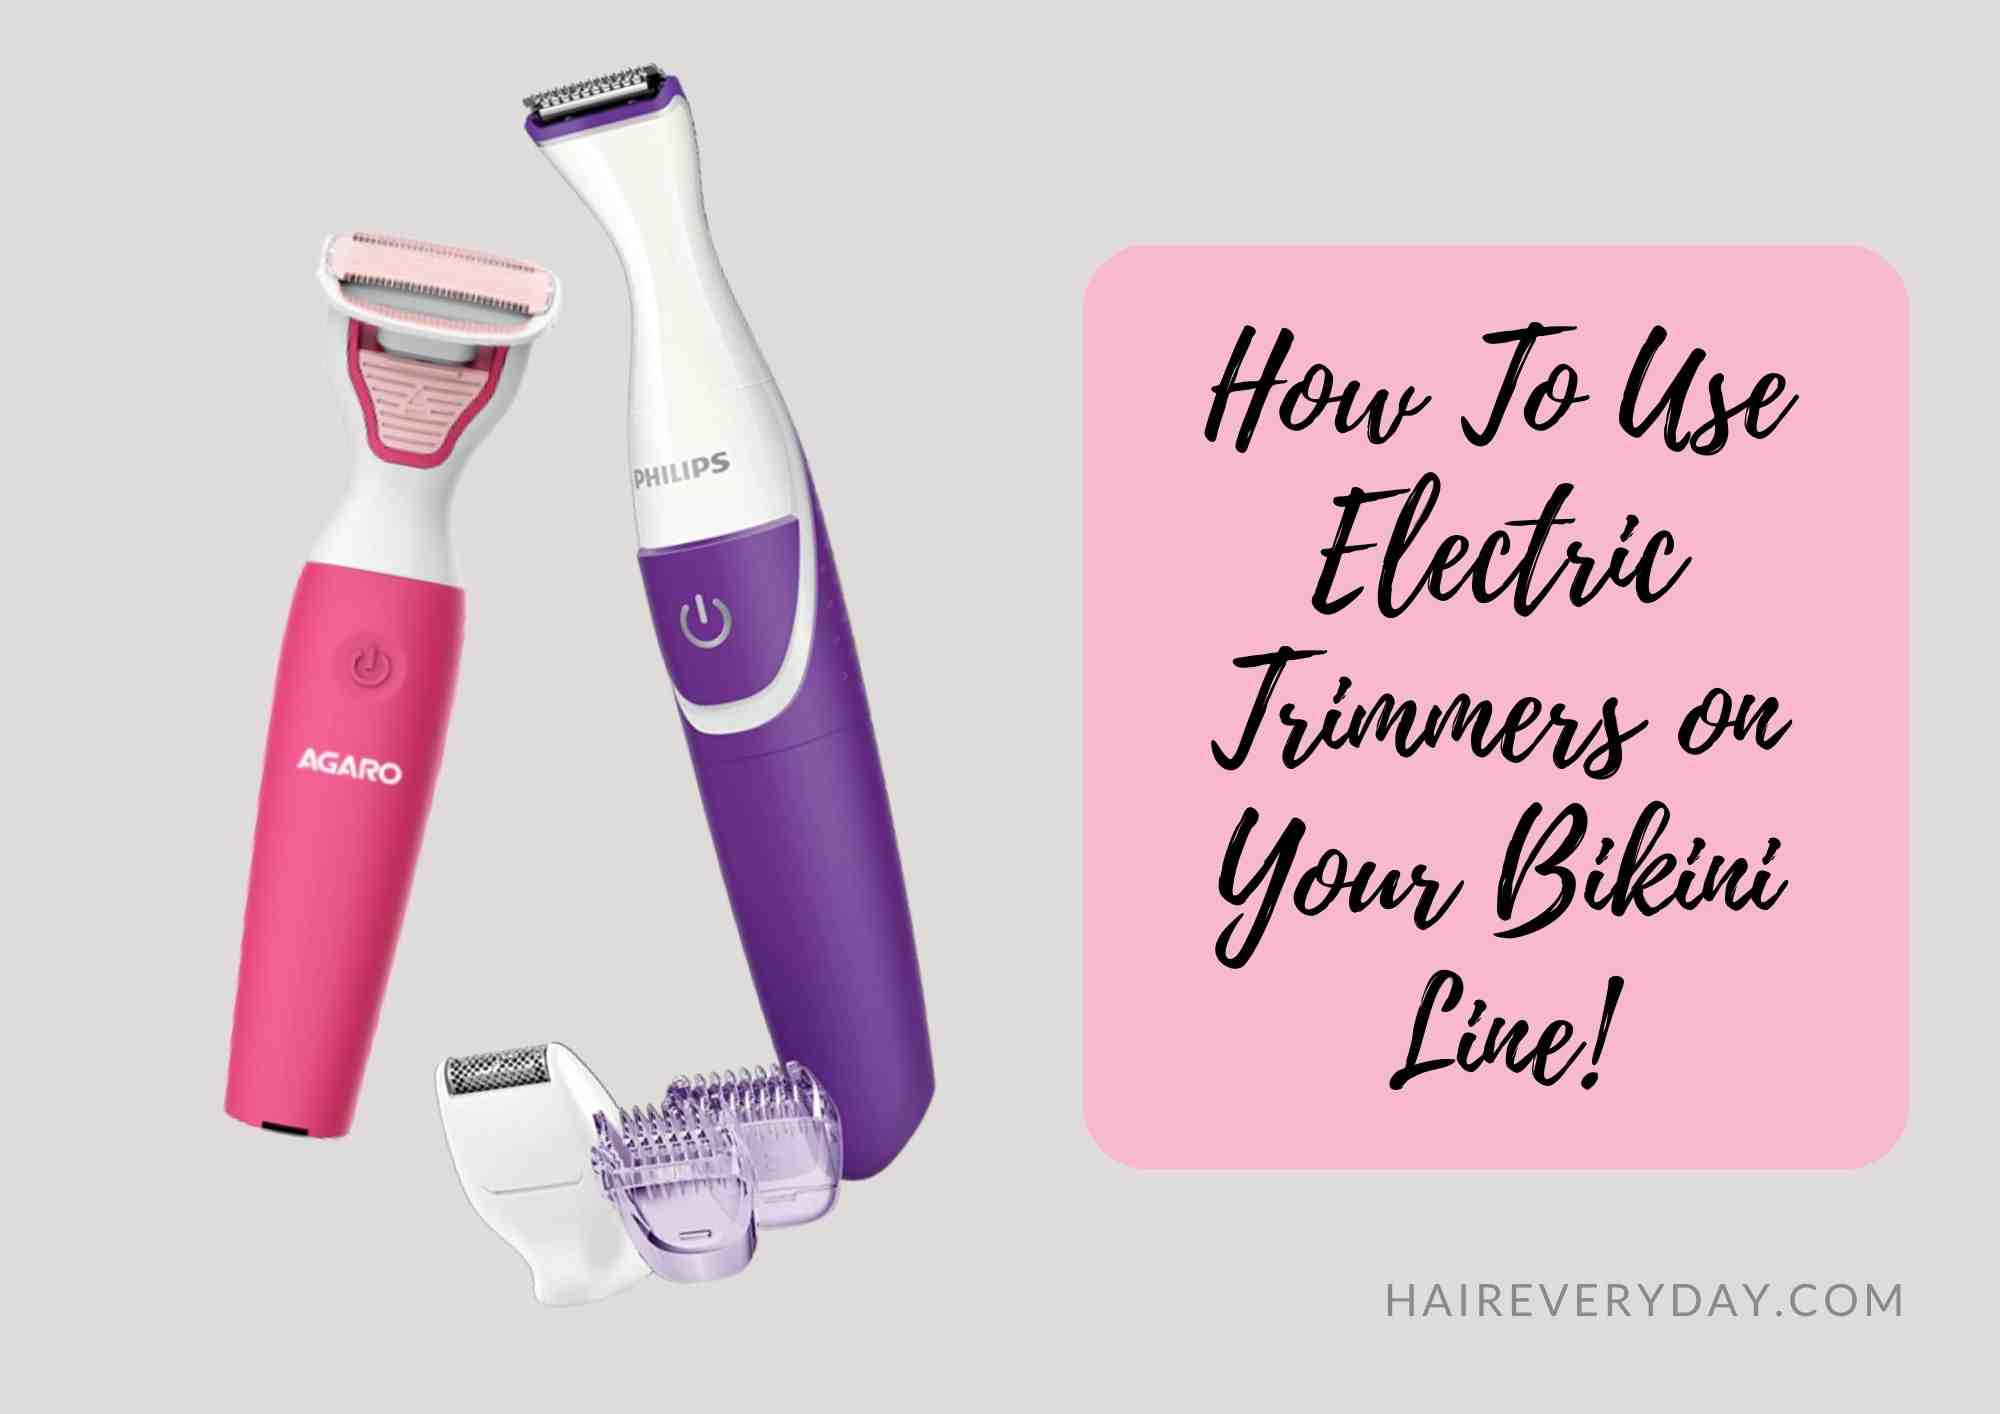 How To Use Electric Bikini Trimmer In 6 Easy Steps - Hair Everyday Review